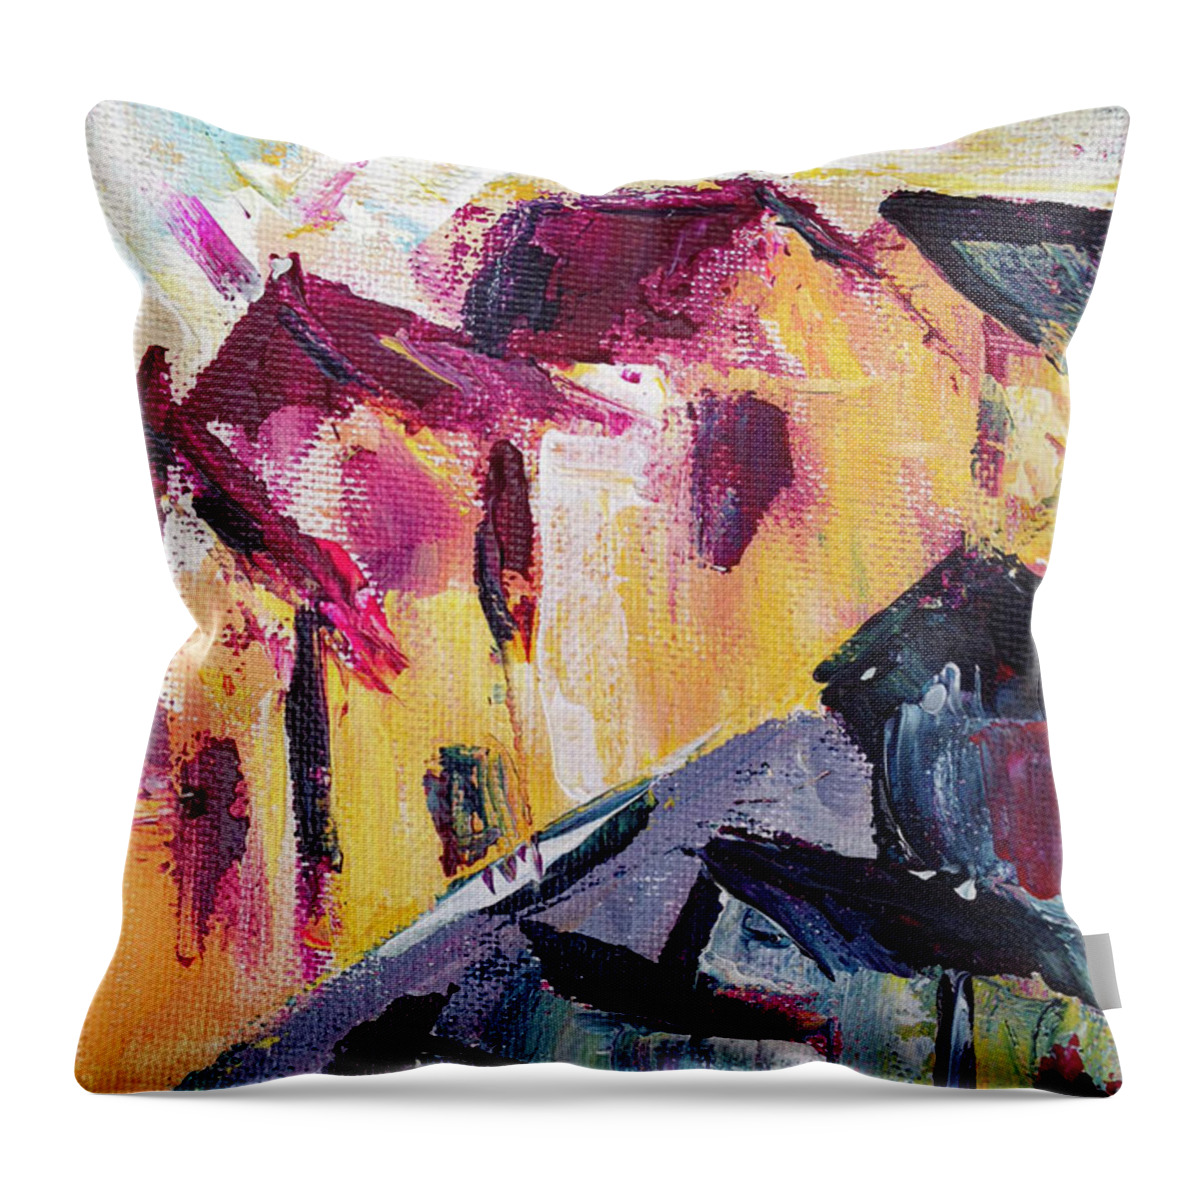 Solvang Throw Pillow featuring the painting Impression of Solvang by Roxy Rich